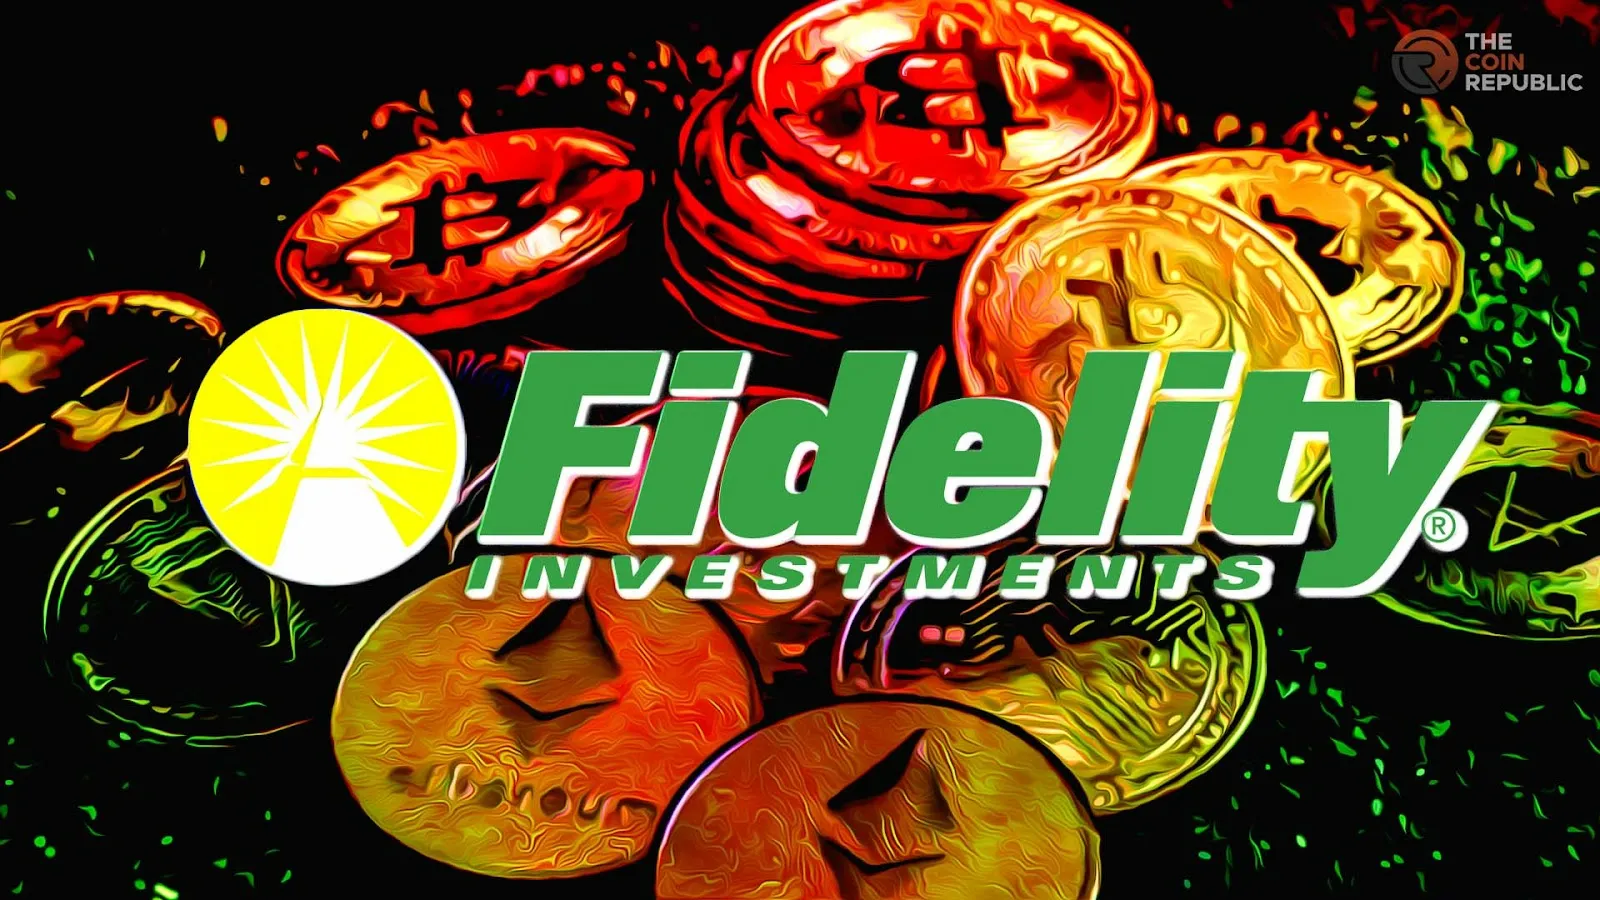 Fidelity Will Not Urge People to Buy Bitcoin, Says Christian